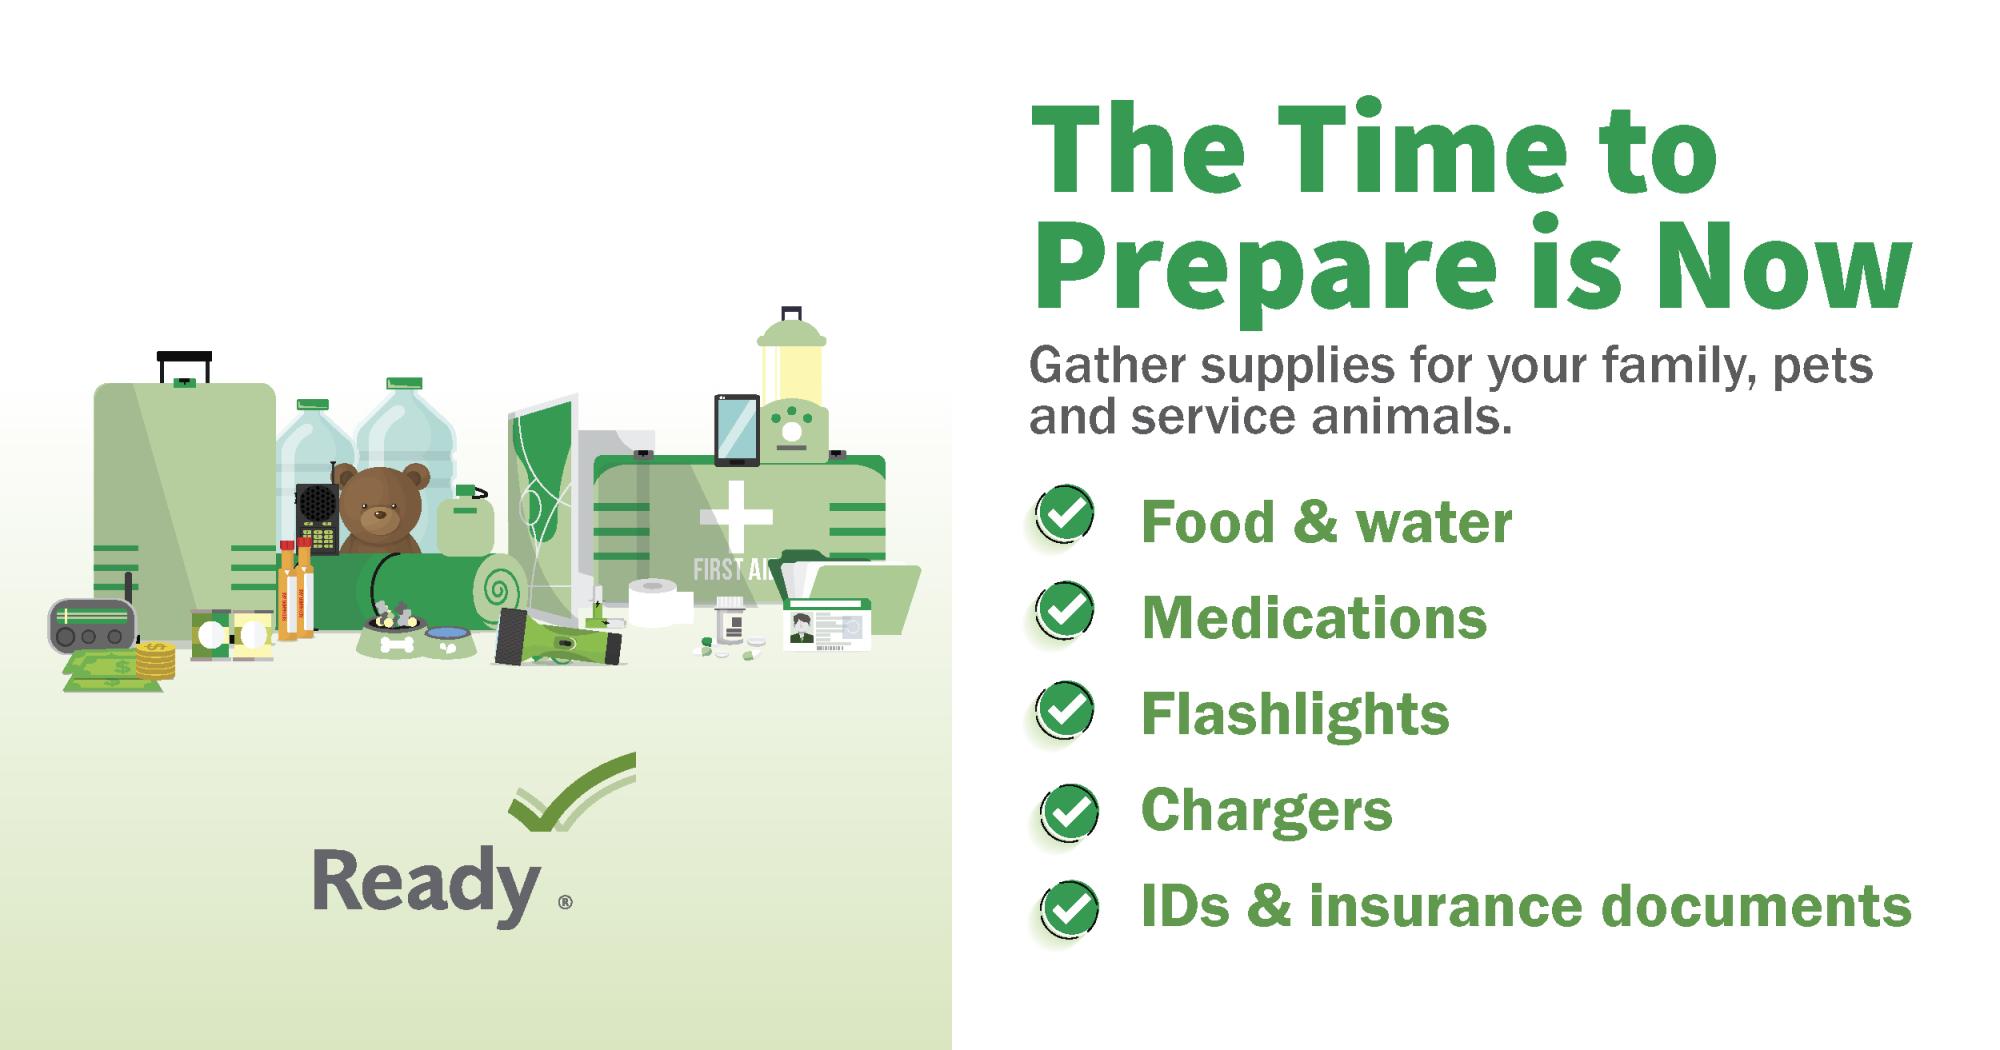 The Time to prepare is now, before the storm.  Make sure you have Food & Water, Medications, Flashlights, Chargers, ID & Insurance Cards.